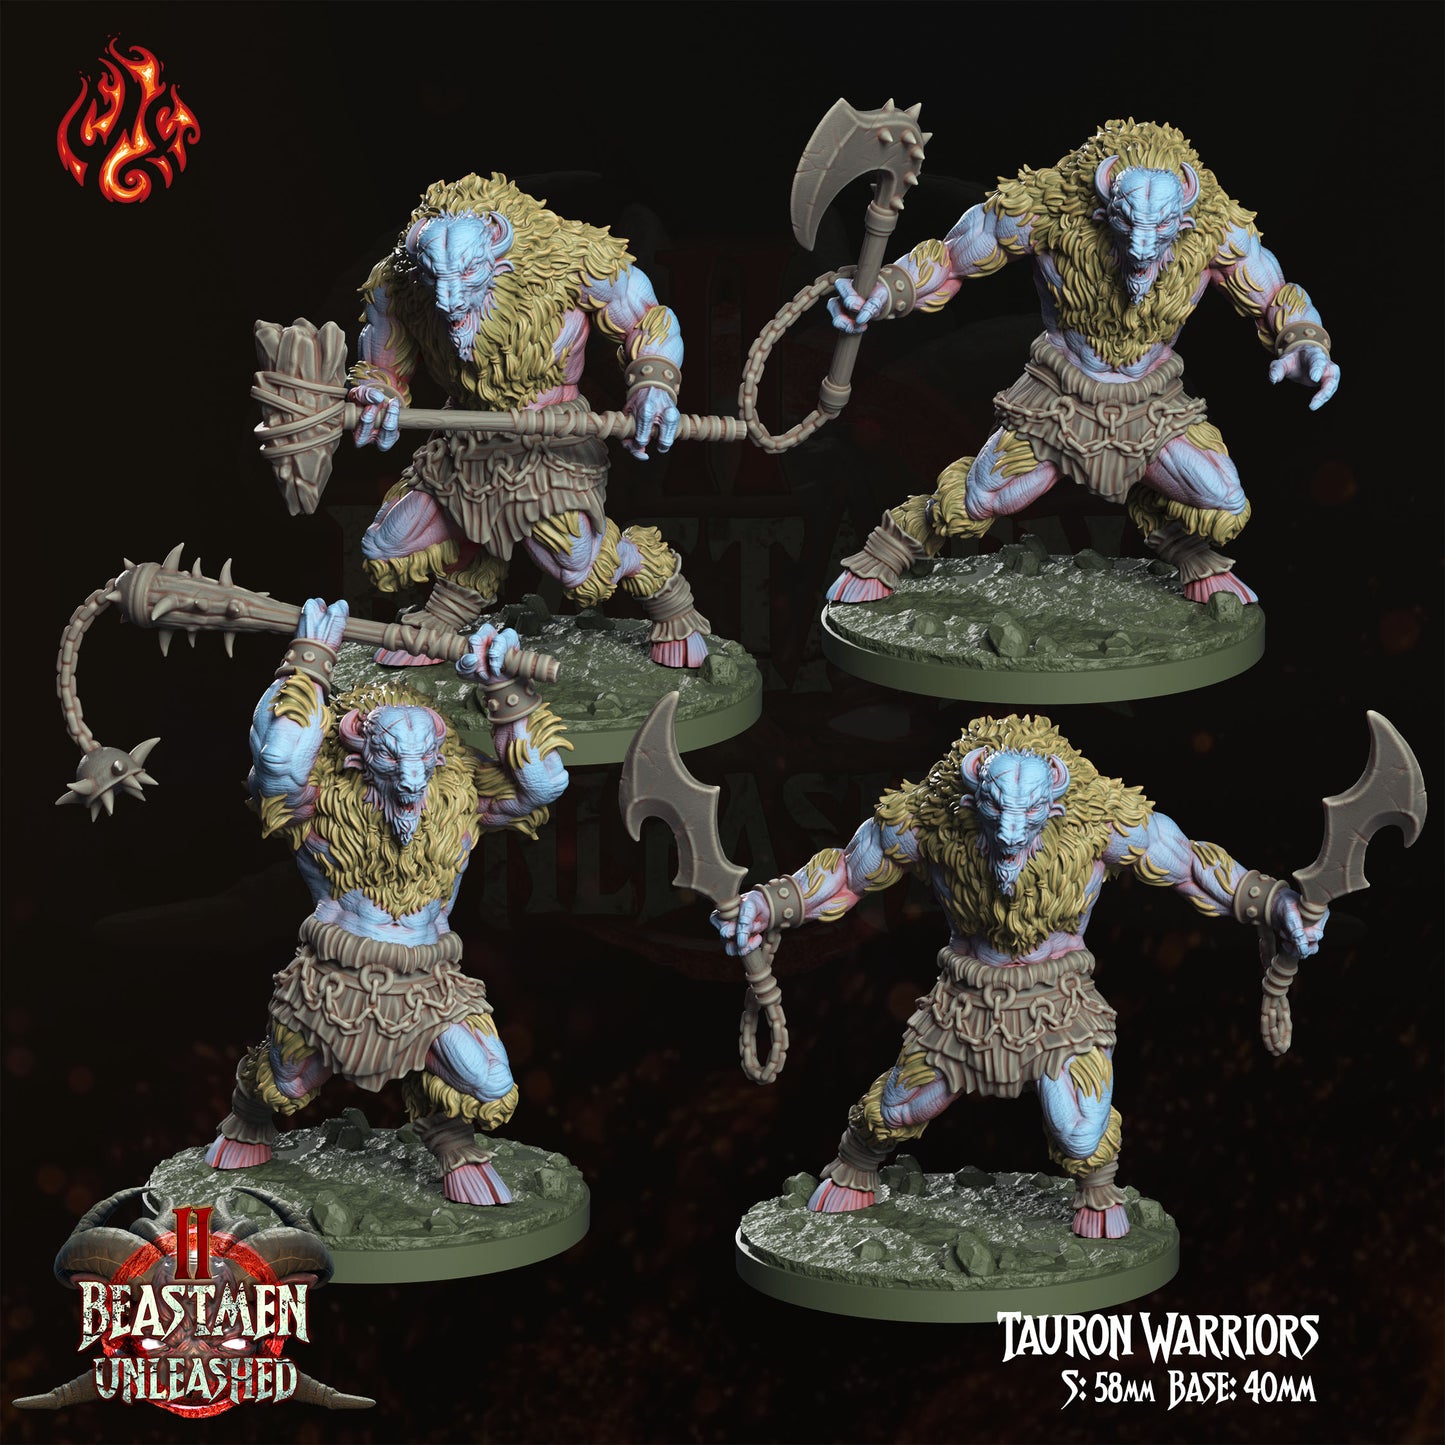 Tauron Warriors - Beastmen Unleashed - from Crippled God Foundry - Table-top gaming mini and collectable for painting.